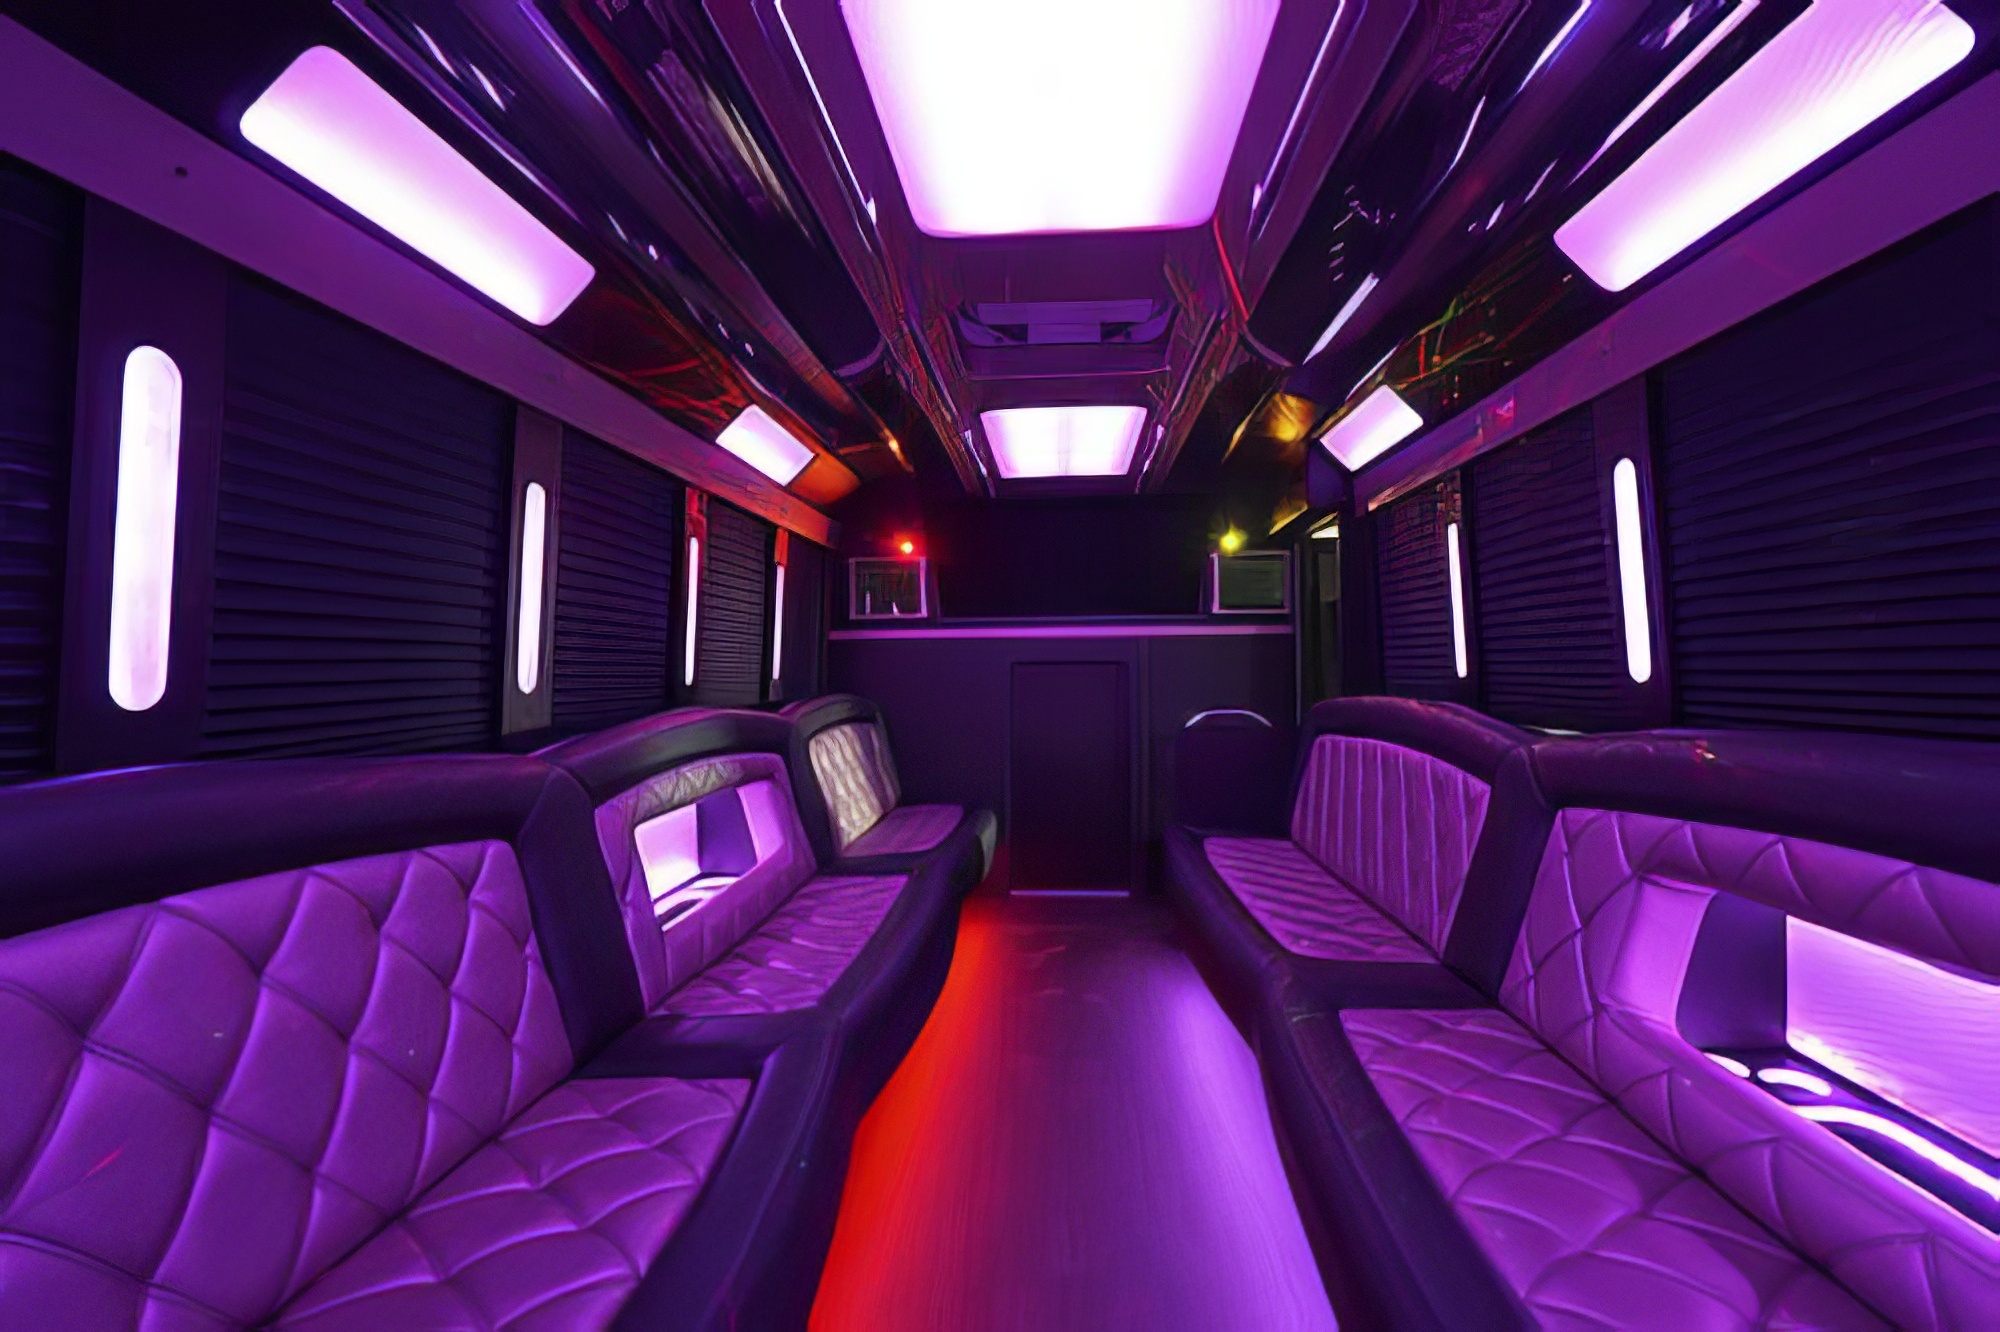 Perfect amenities in a party bus